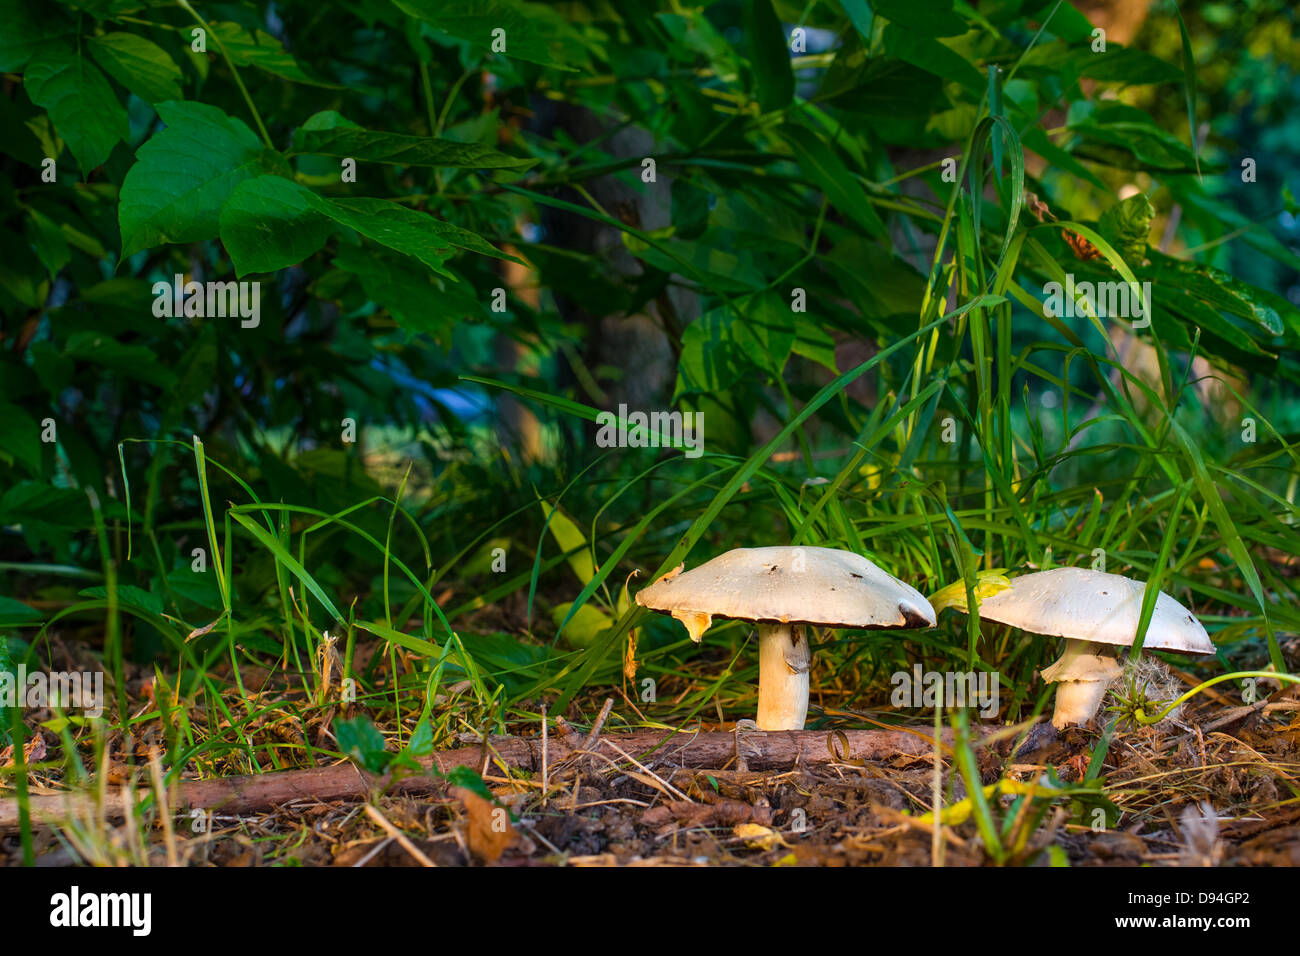 White Mushrooms family in the overgrown, wild forest. The fungal order Agaricales Stock Photo